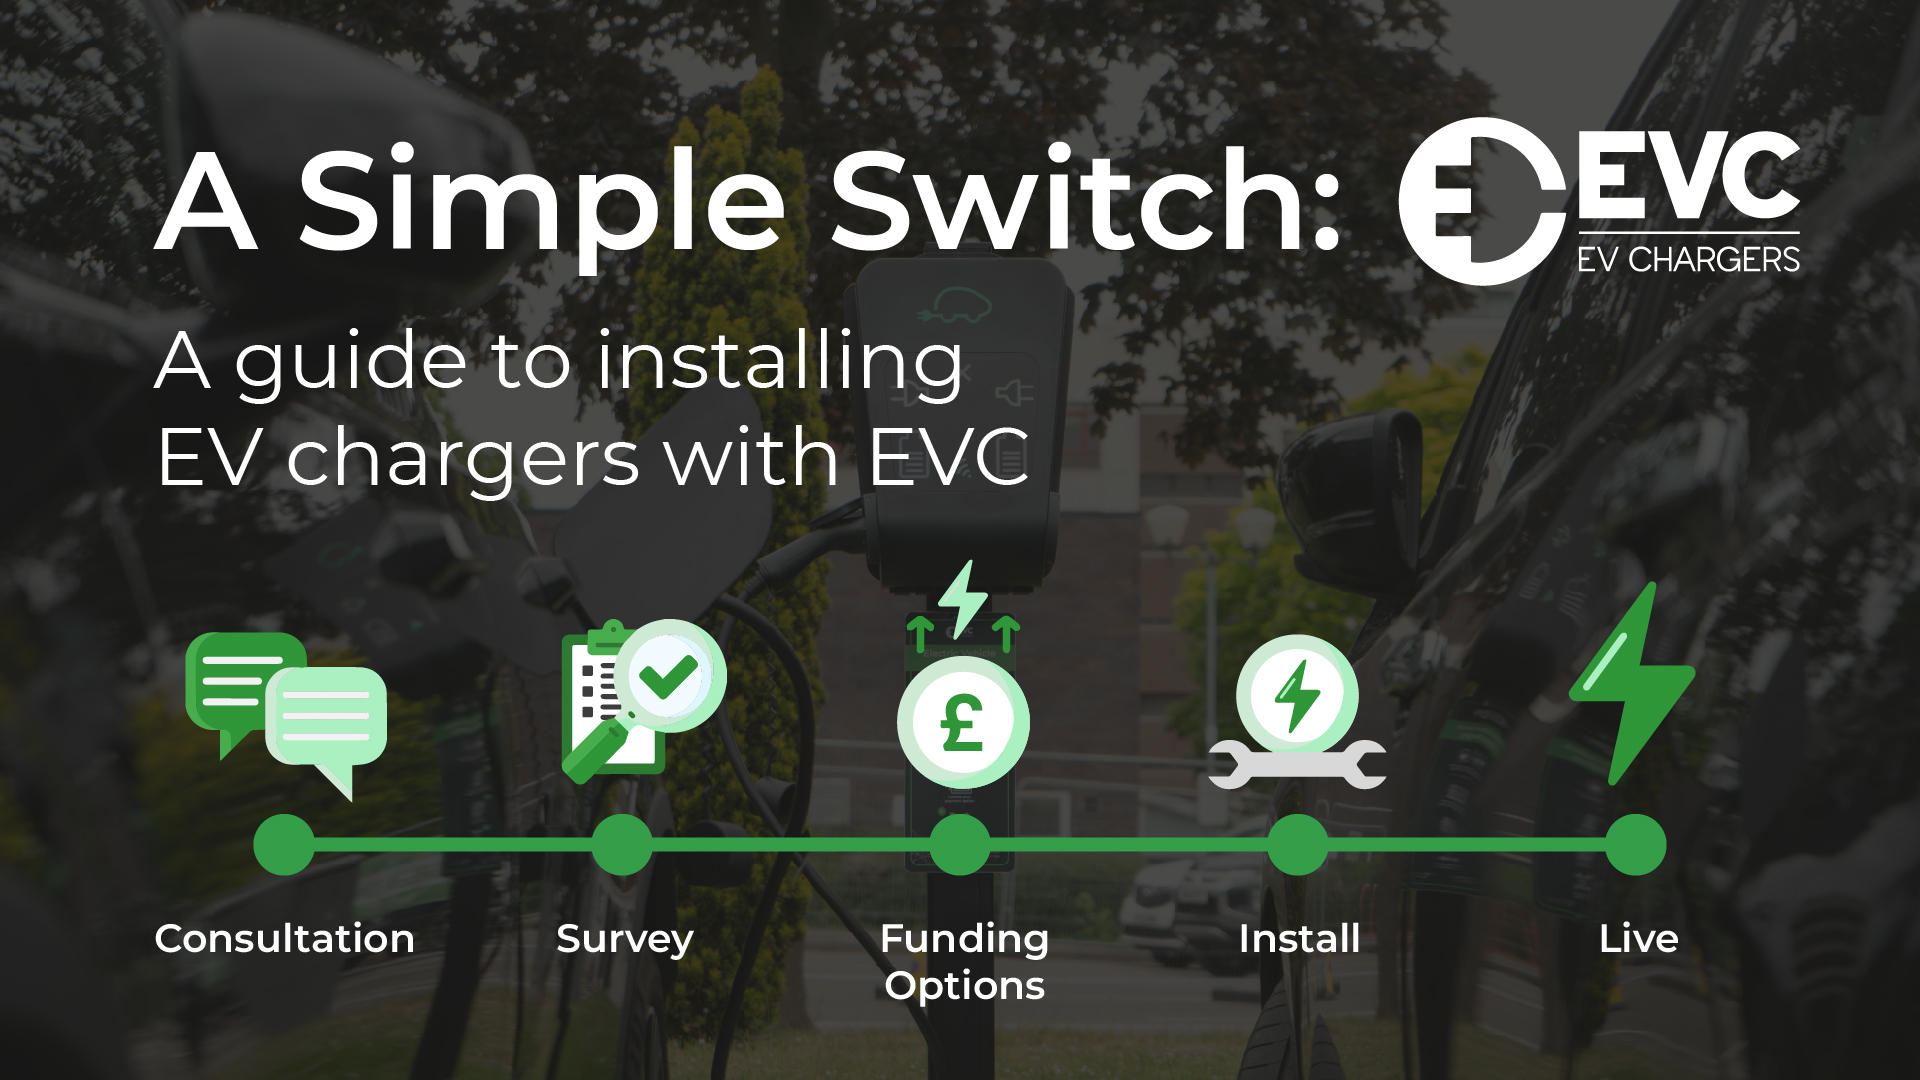 A simple guide to installing EV chargers with EVC